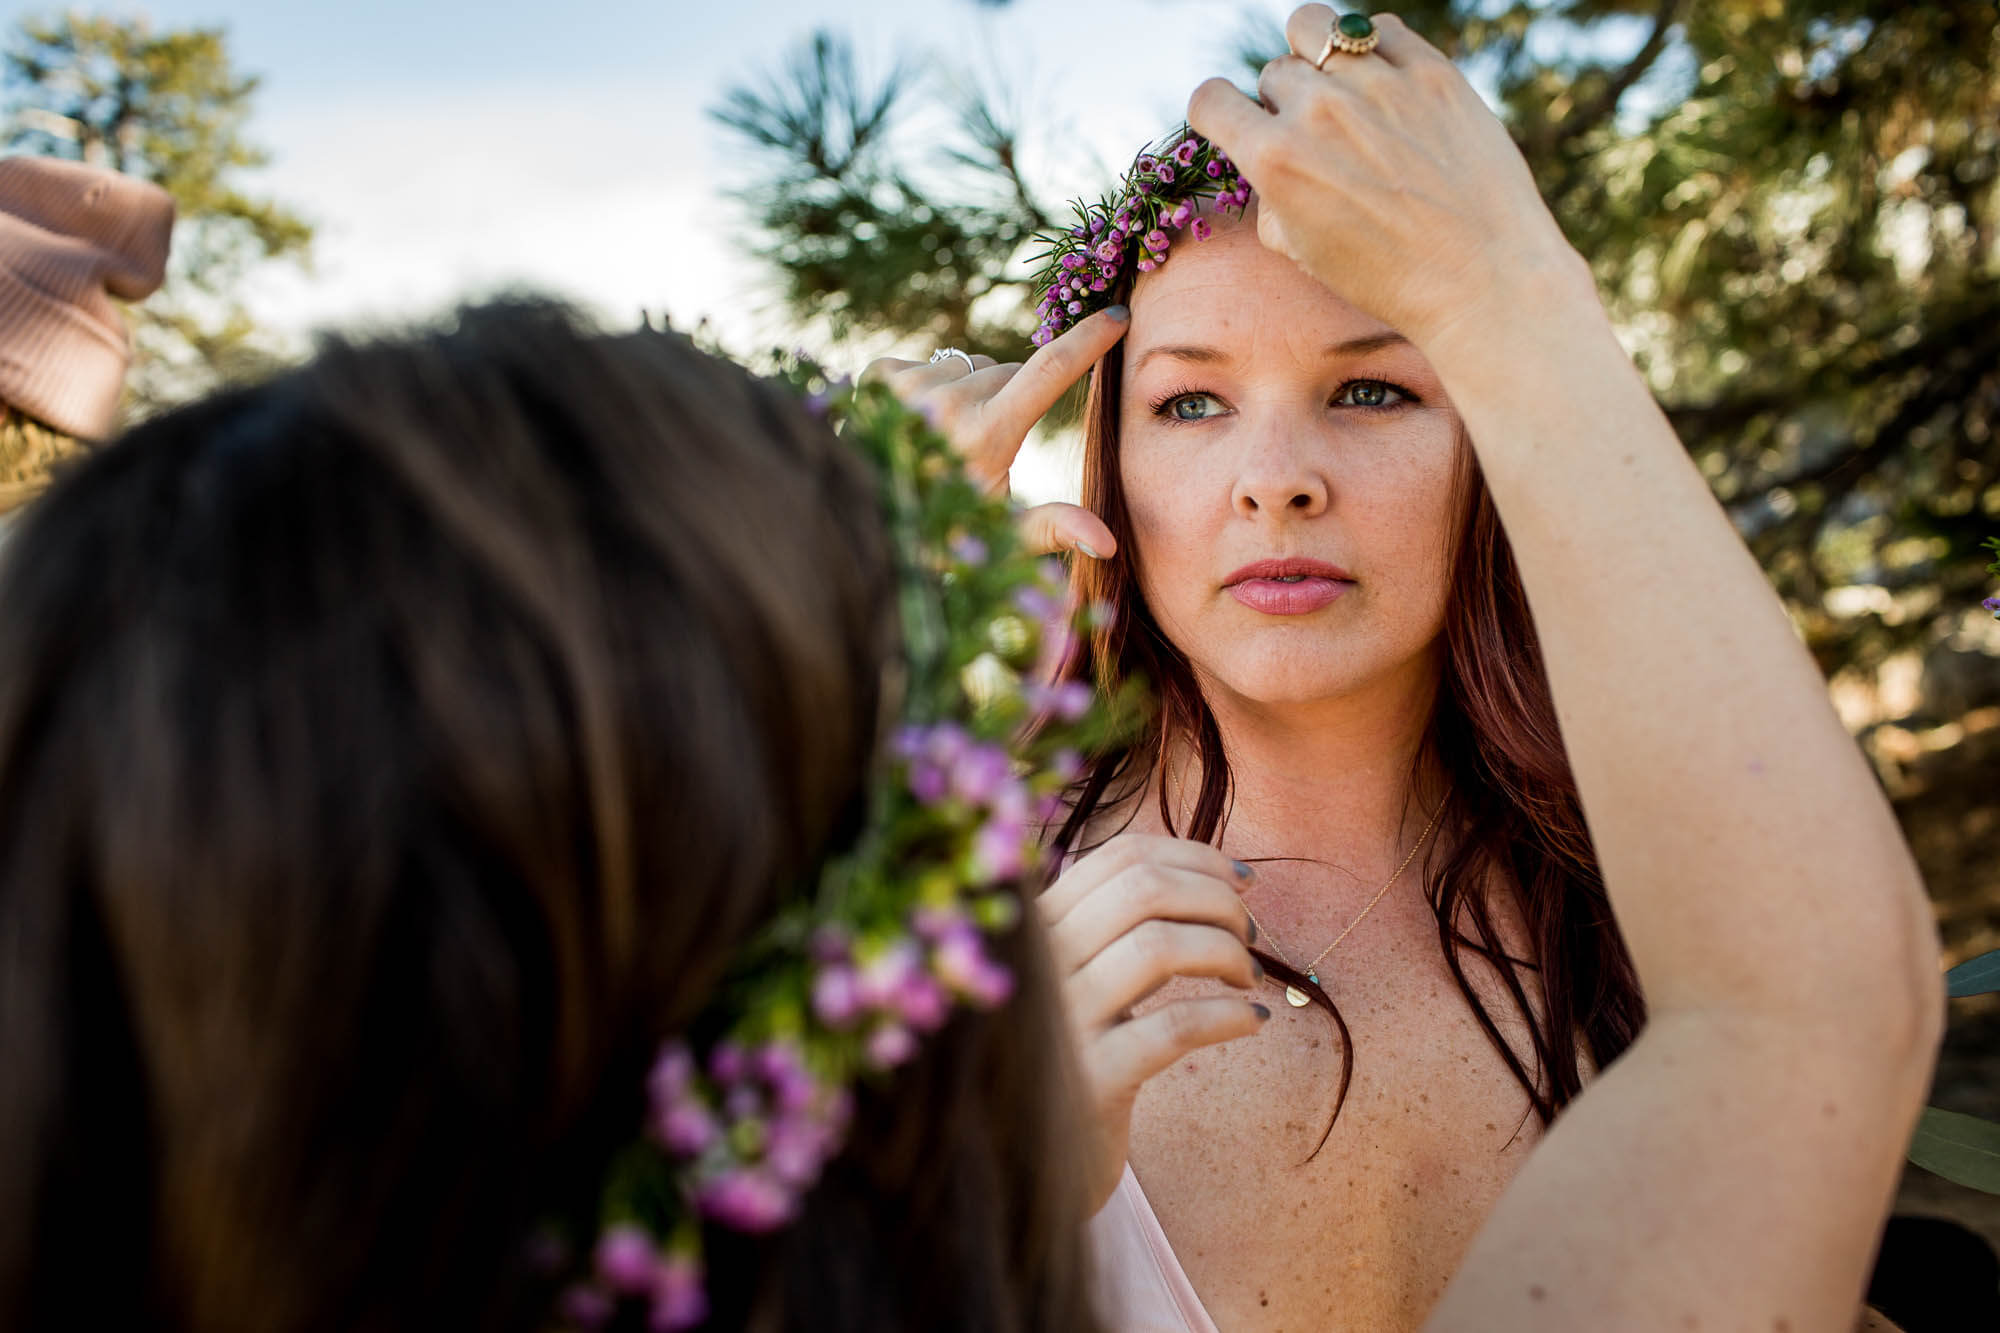 Bridesmaid adjusts another bridesmaid's flower crown